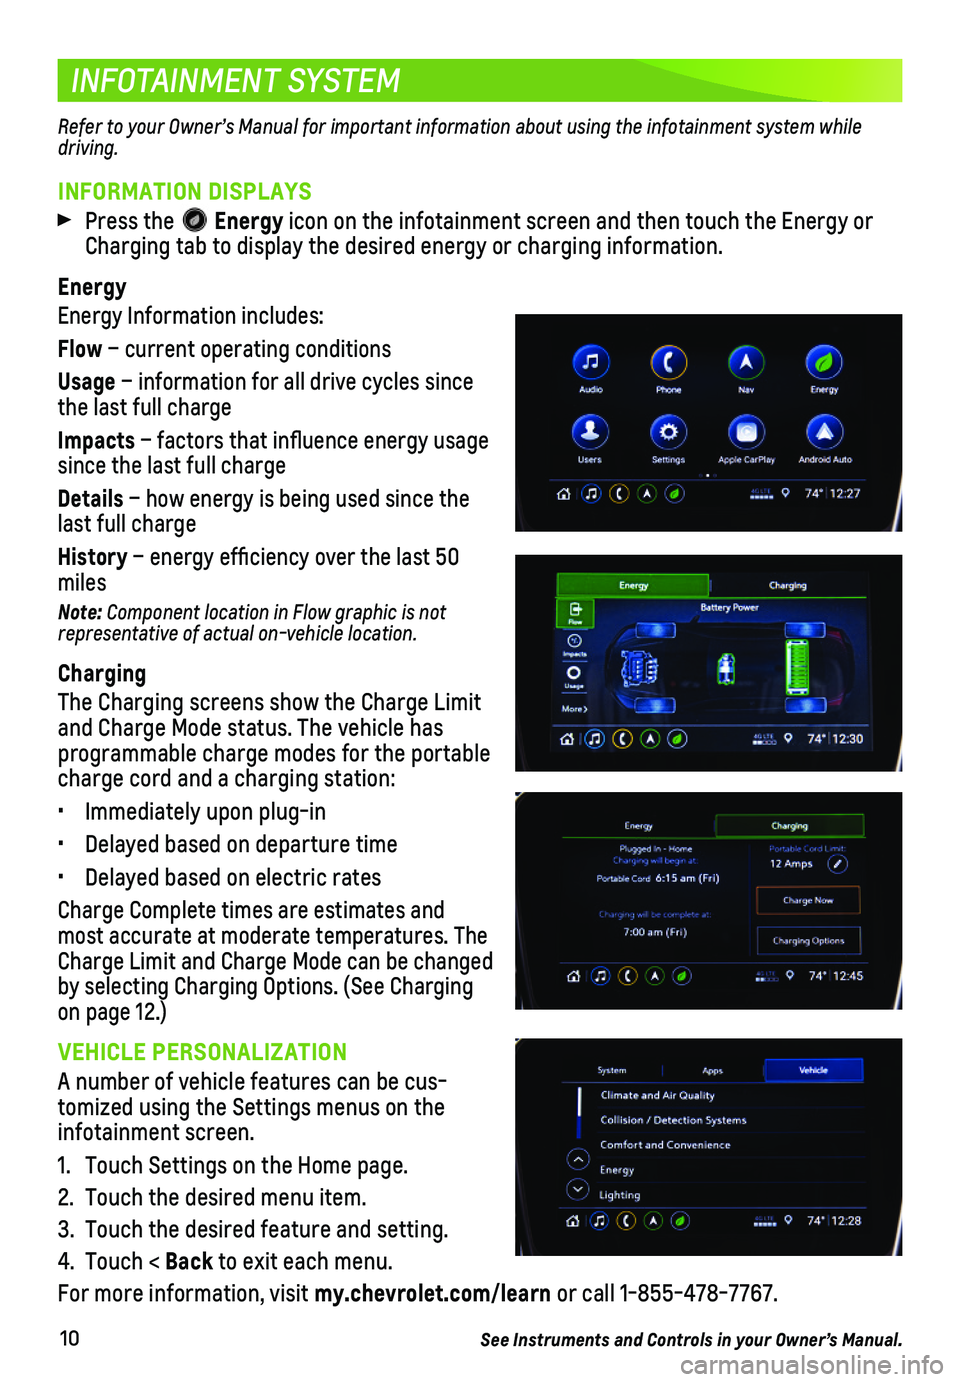 CHEVROLET VOLT 2019  Get To Know Guide 10
INFOTAINMENT SYSTEM
INFORMATION DISPLAYS
 Press the  Energy icon on the infotainment screen and then touch the Energy or Charging tab to display the desired energy or charging information.
Energy
E